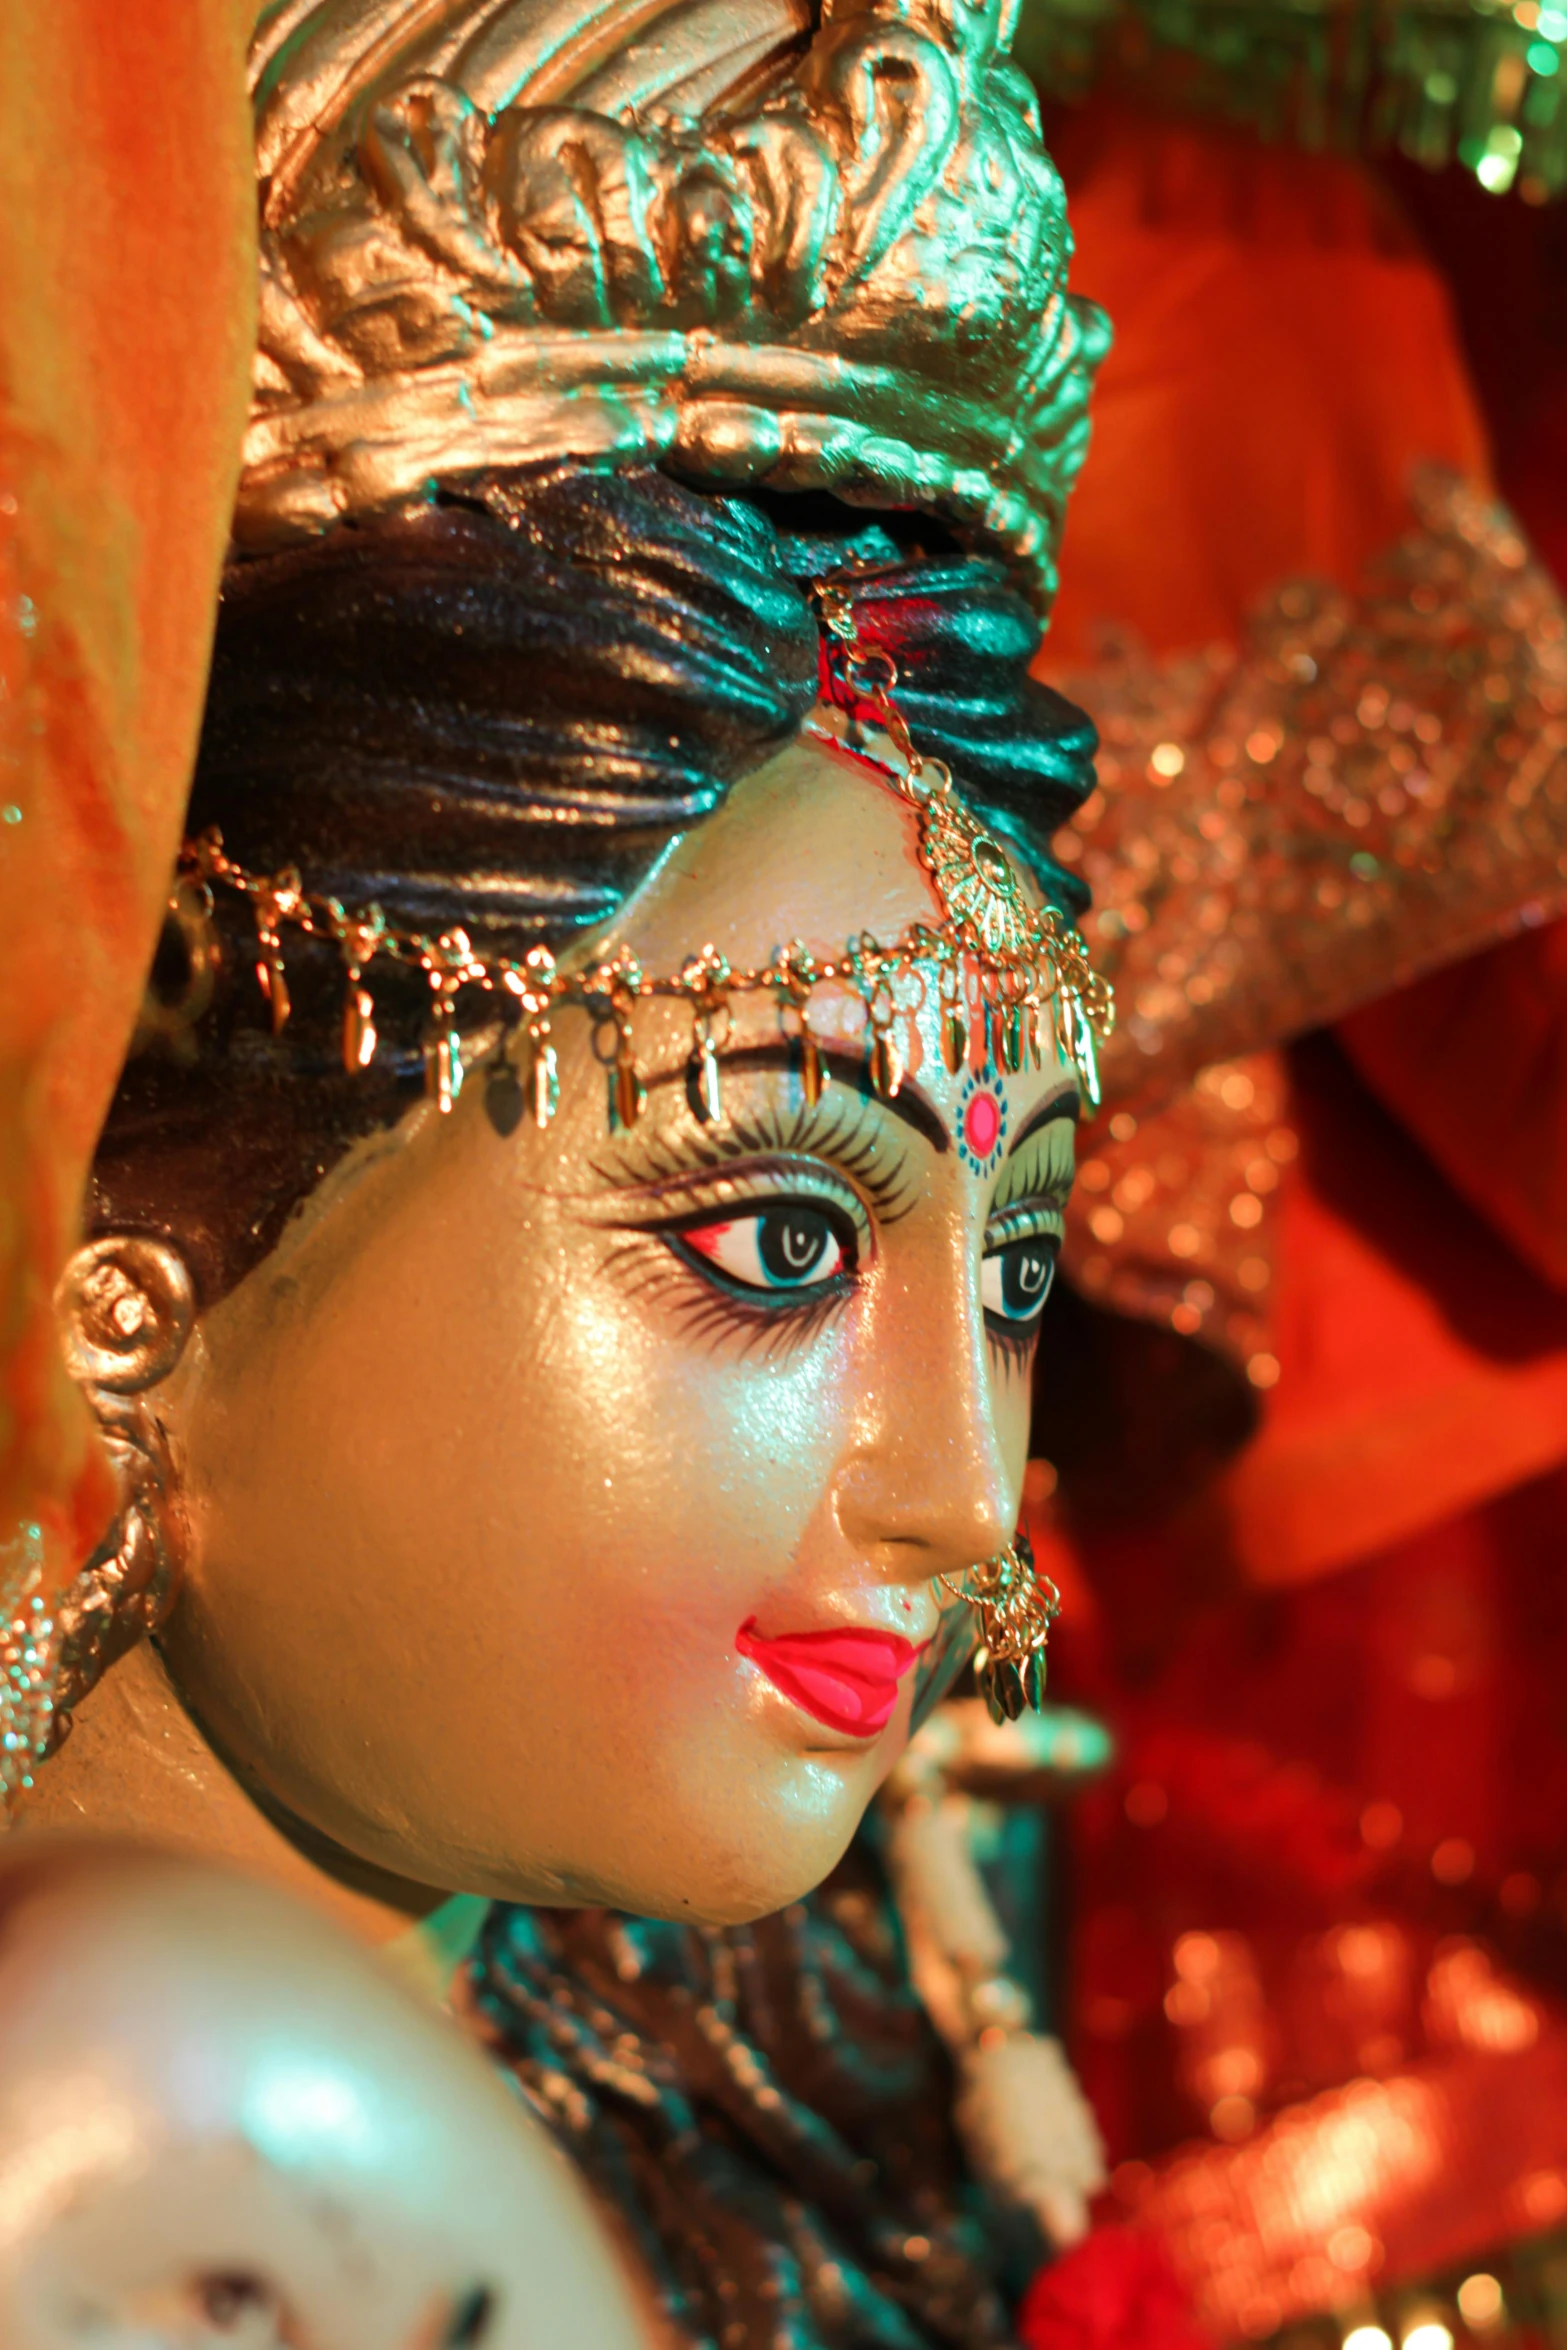 a close up of a statue of a woman, bengal school of art, festival of rich colors, slide show, avatar image